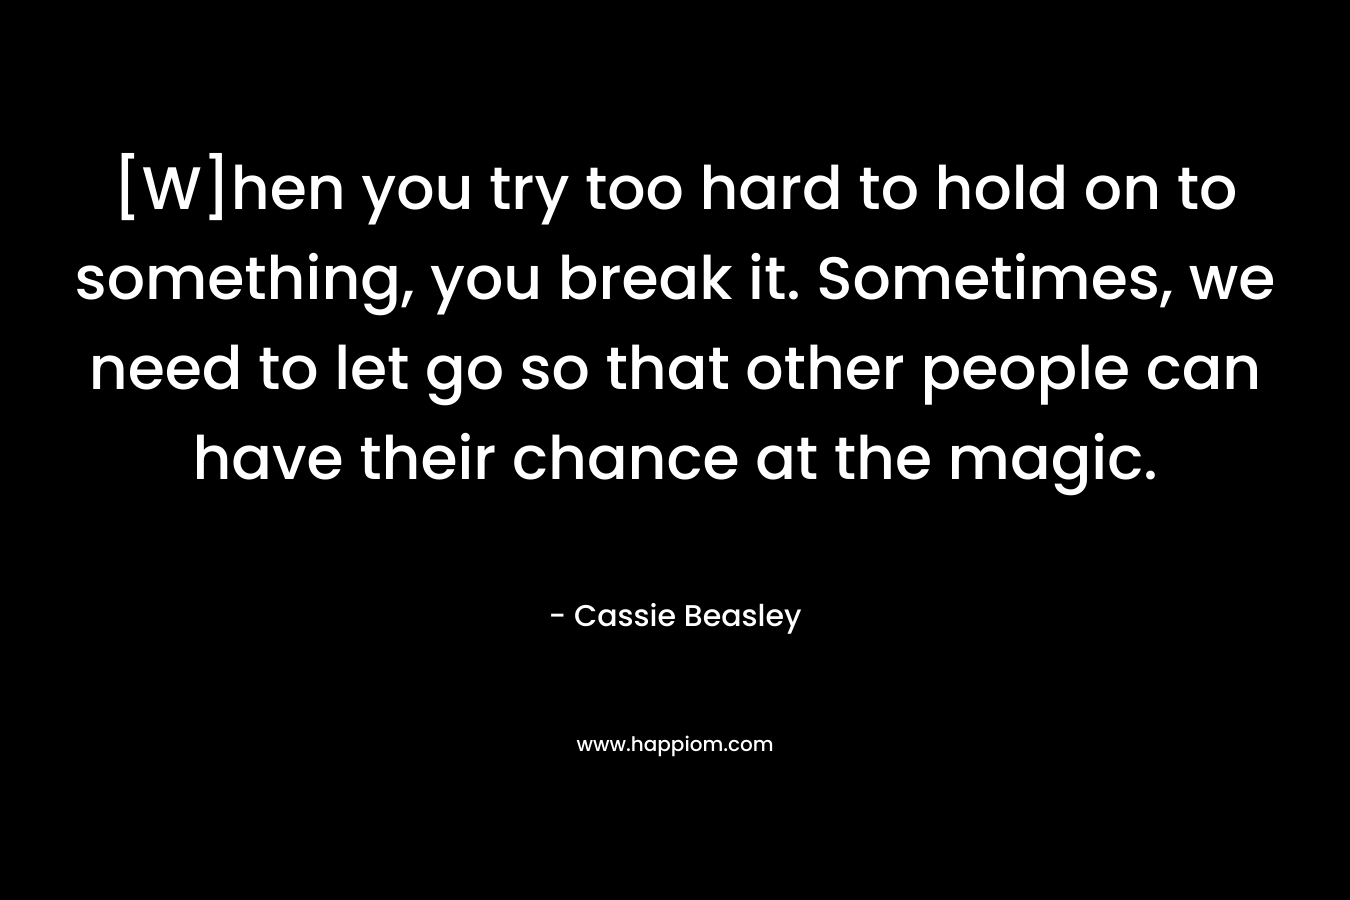 [W]hen you try too hard to hold on to something, you break it. Sometimes, we need to let go so that other people can have their chance at the magic.